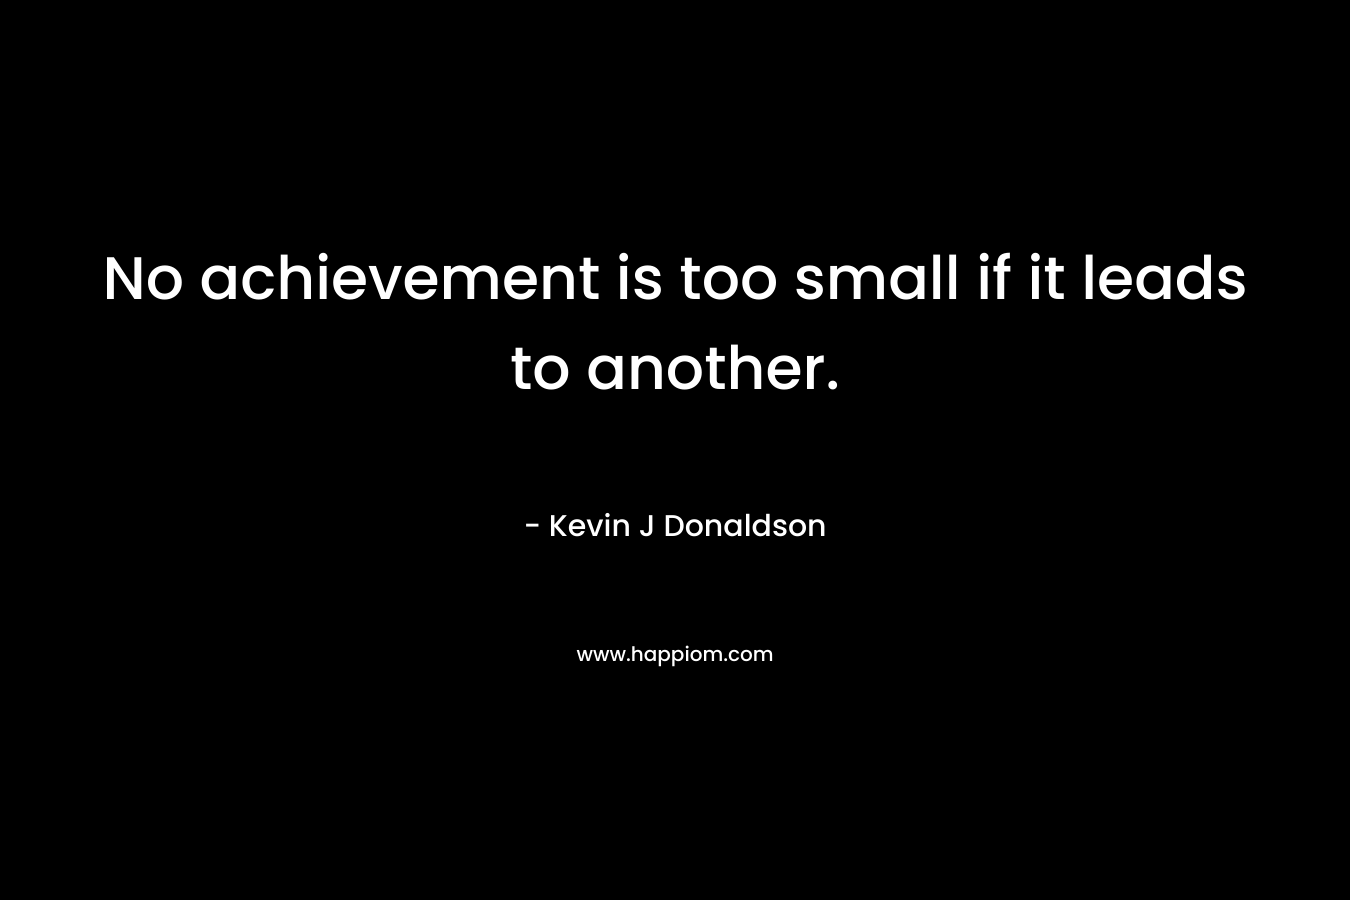 No achievement is too small if it leads to another. – Kevin J Donaldson